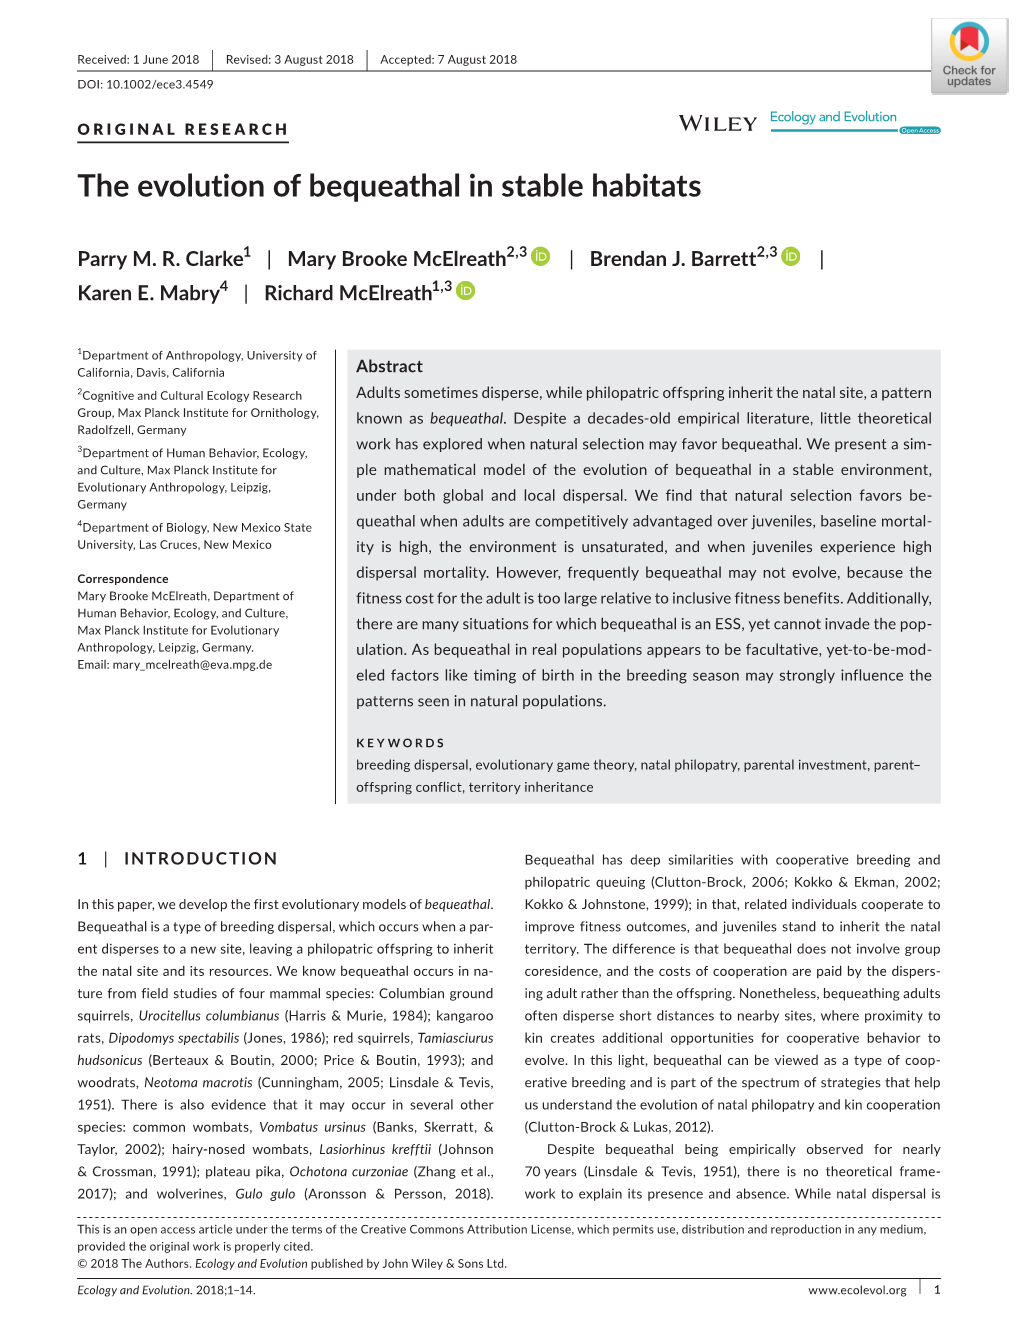 The Evolution of Bequeathal in Stable Habitats